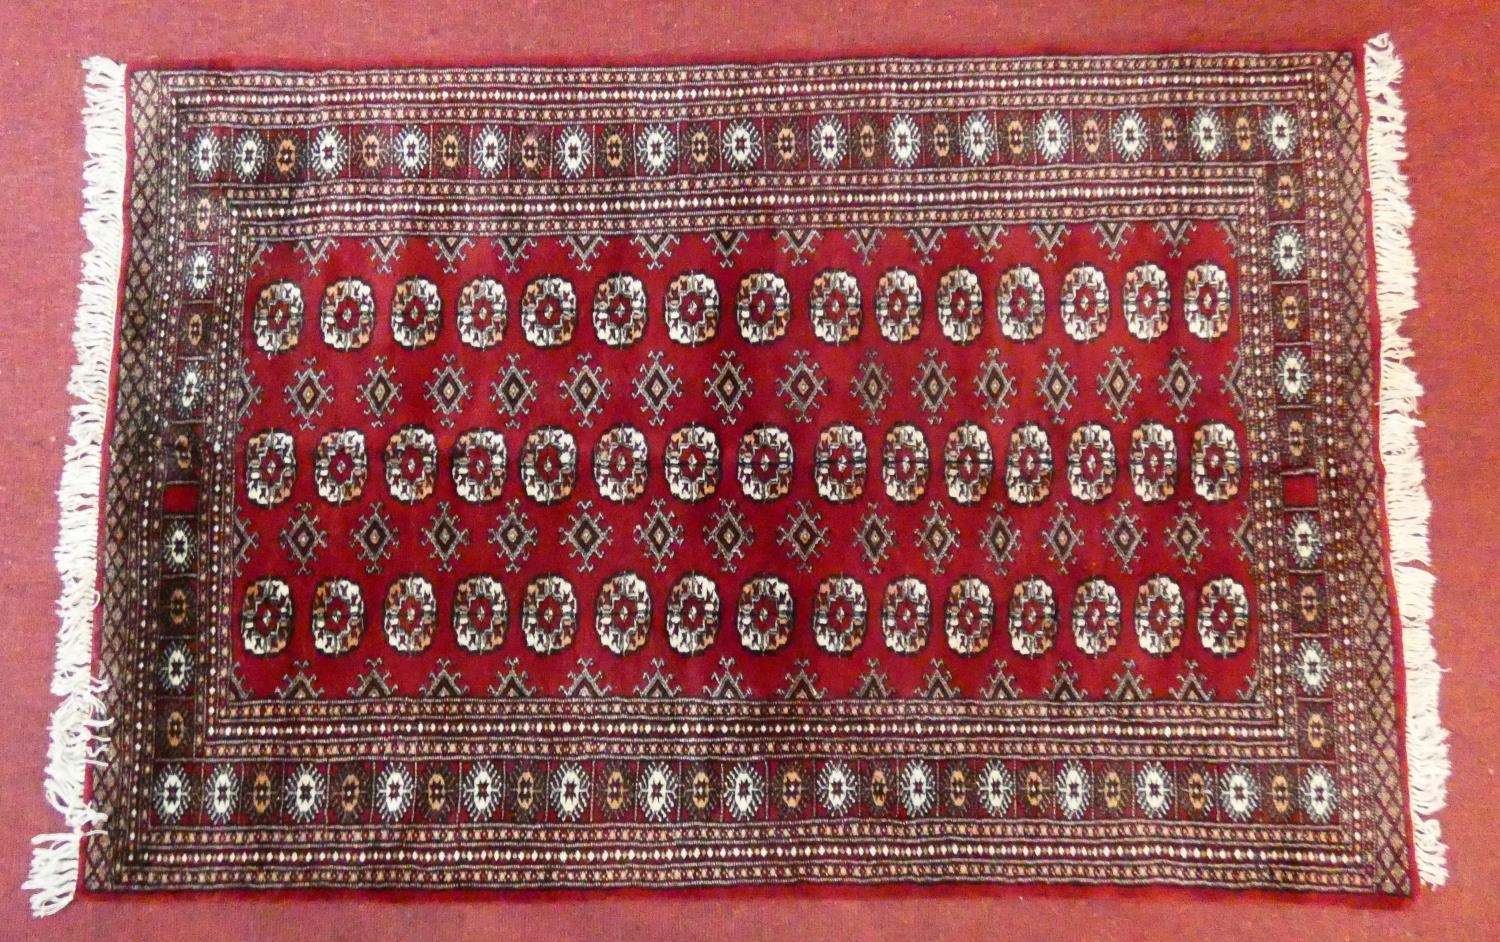 A Bokhara style rug with repeating gul motifs across the madder field enclosed by mutliple geometric